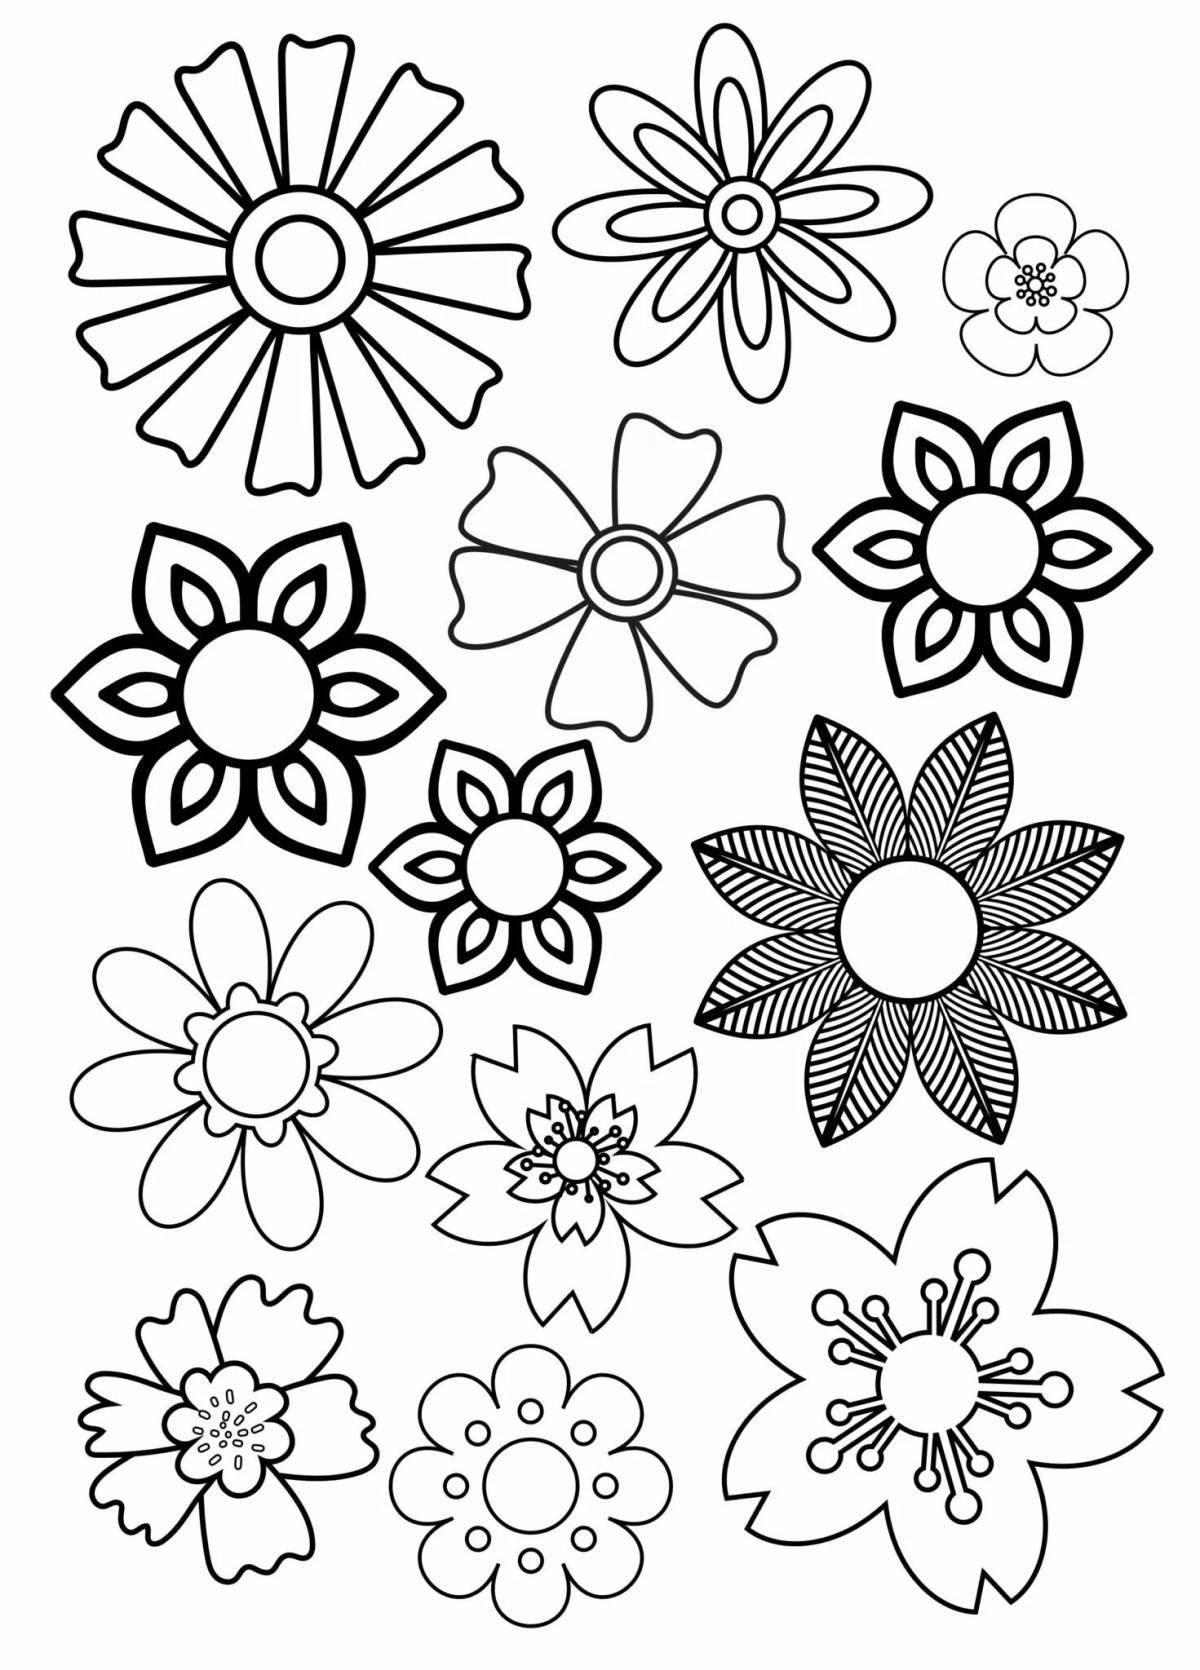 Fun coloring little flowers